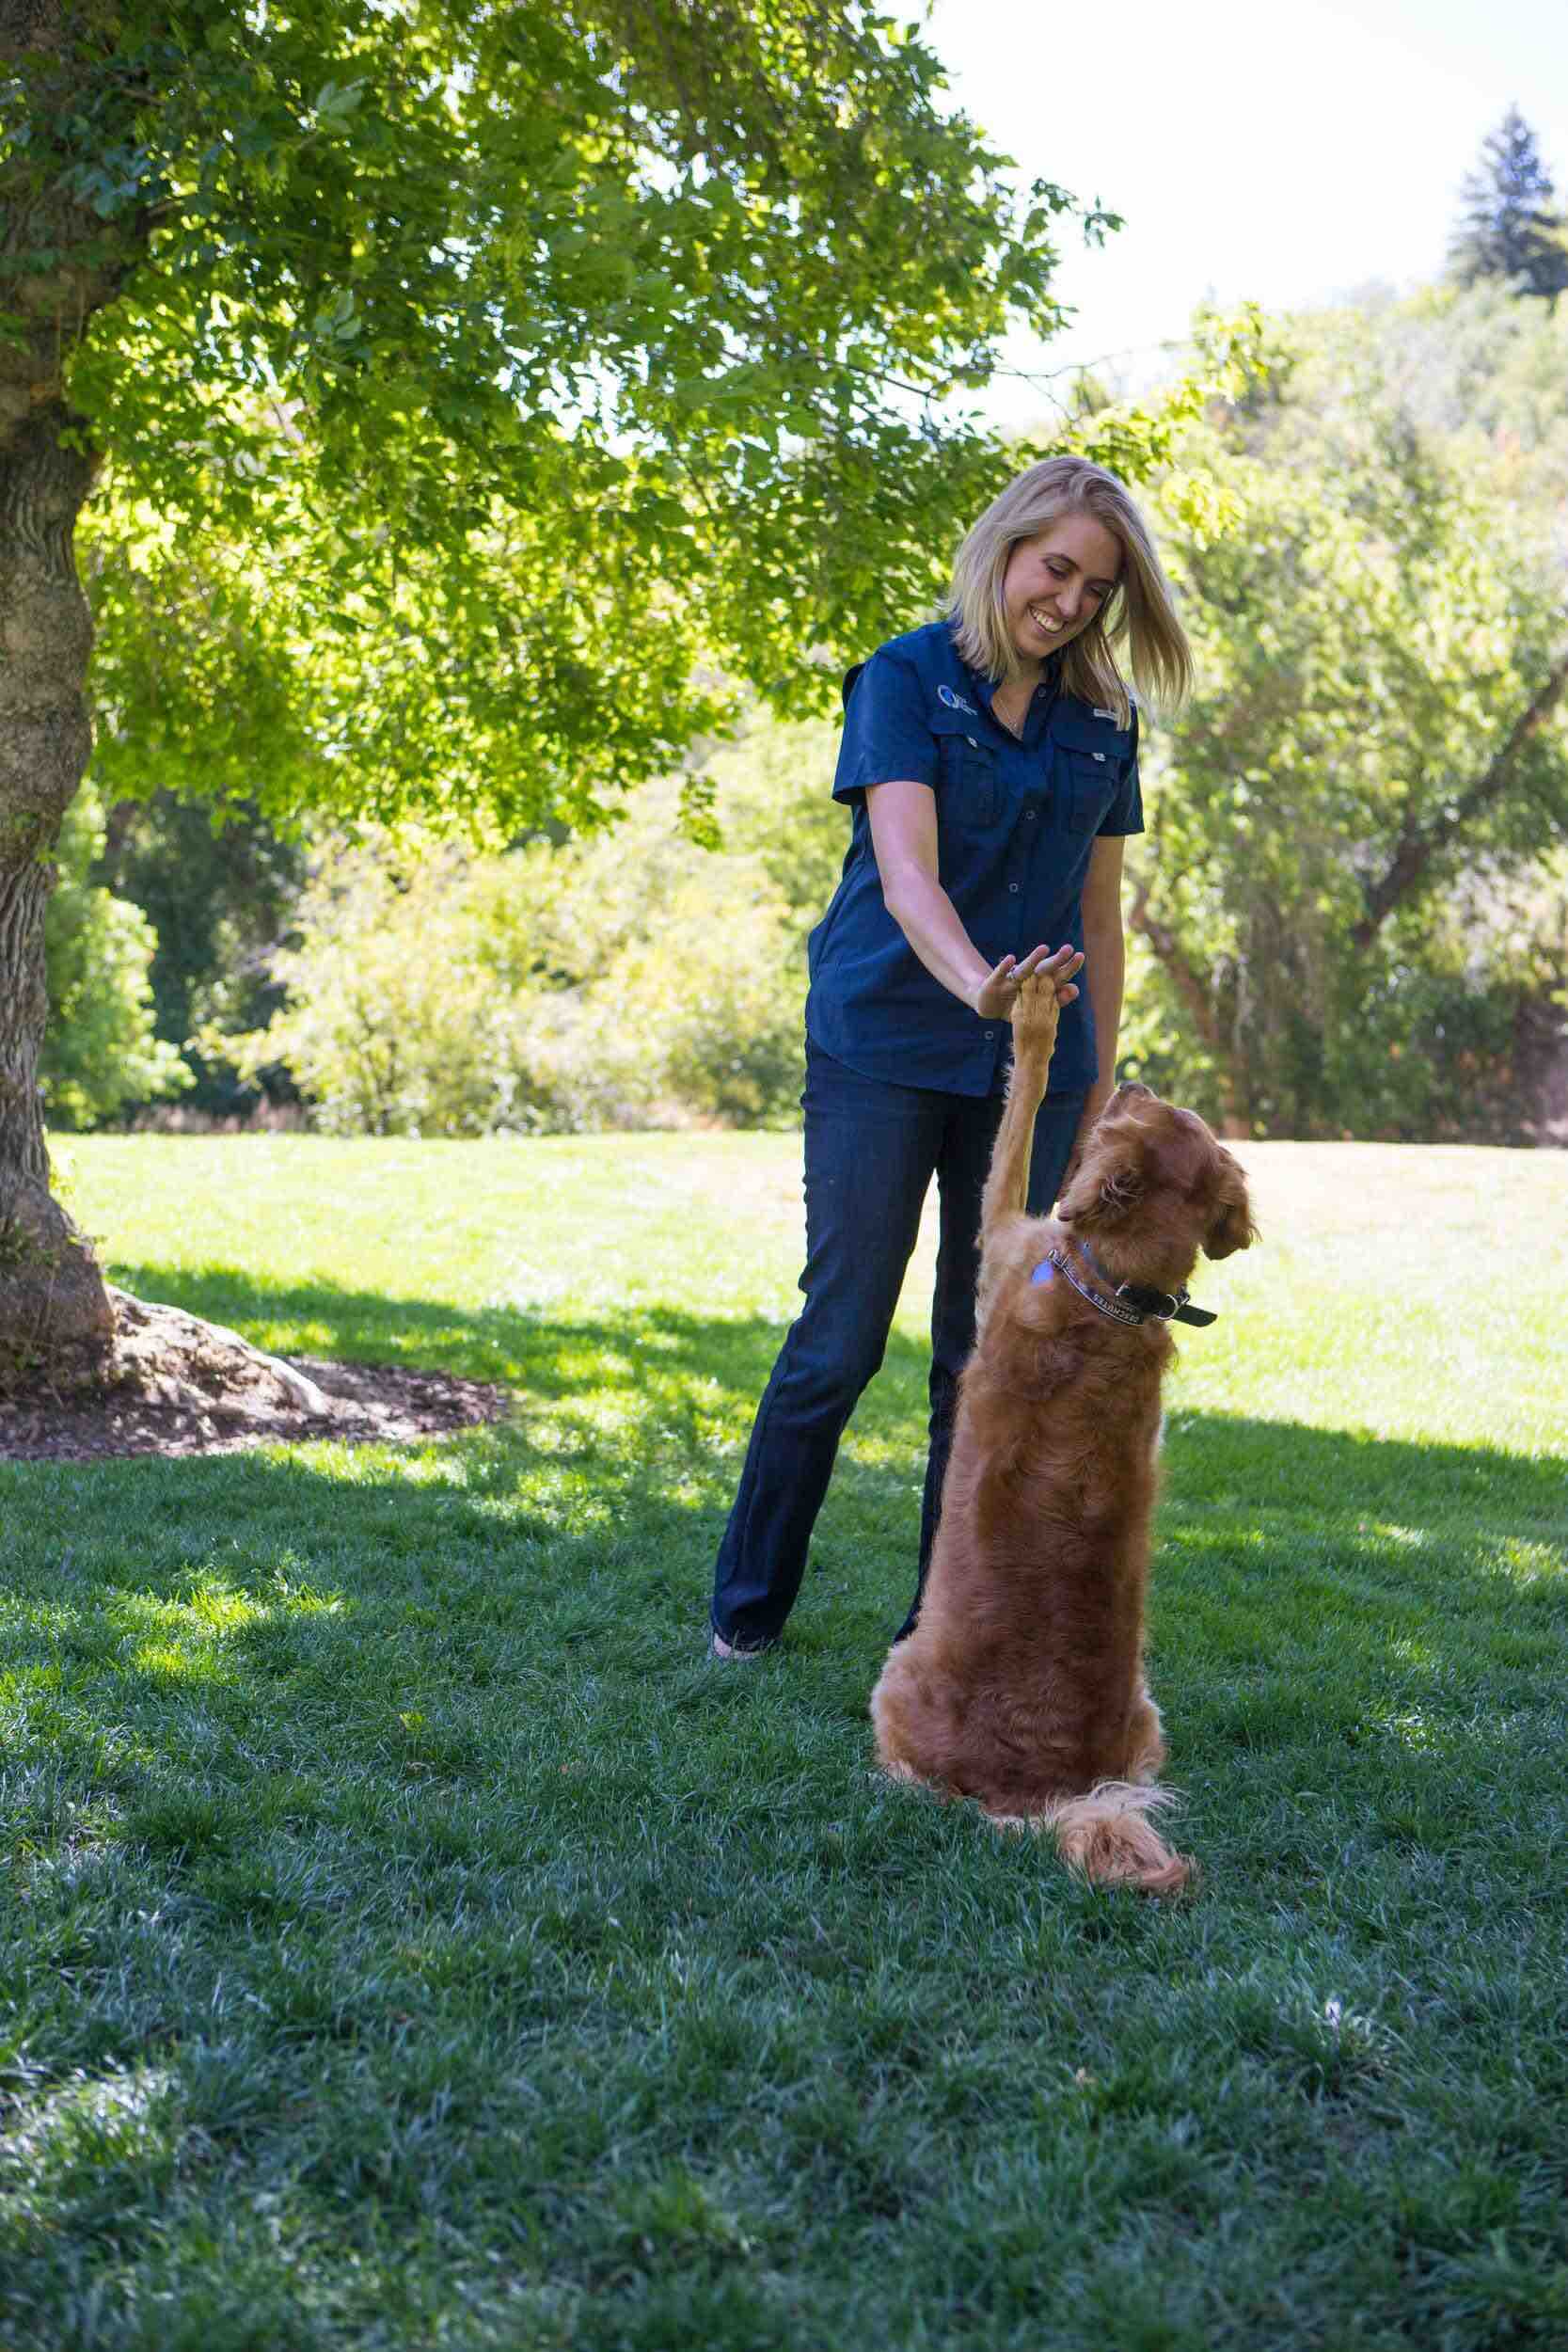 Dog Training Elite uses classical conditioning as one of their dog training techniques in Albuquerque / Santa Fe.